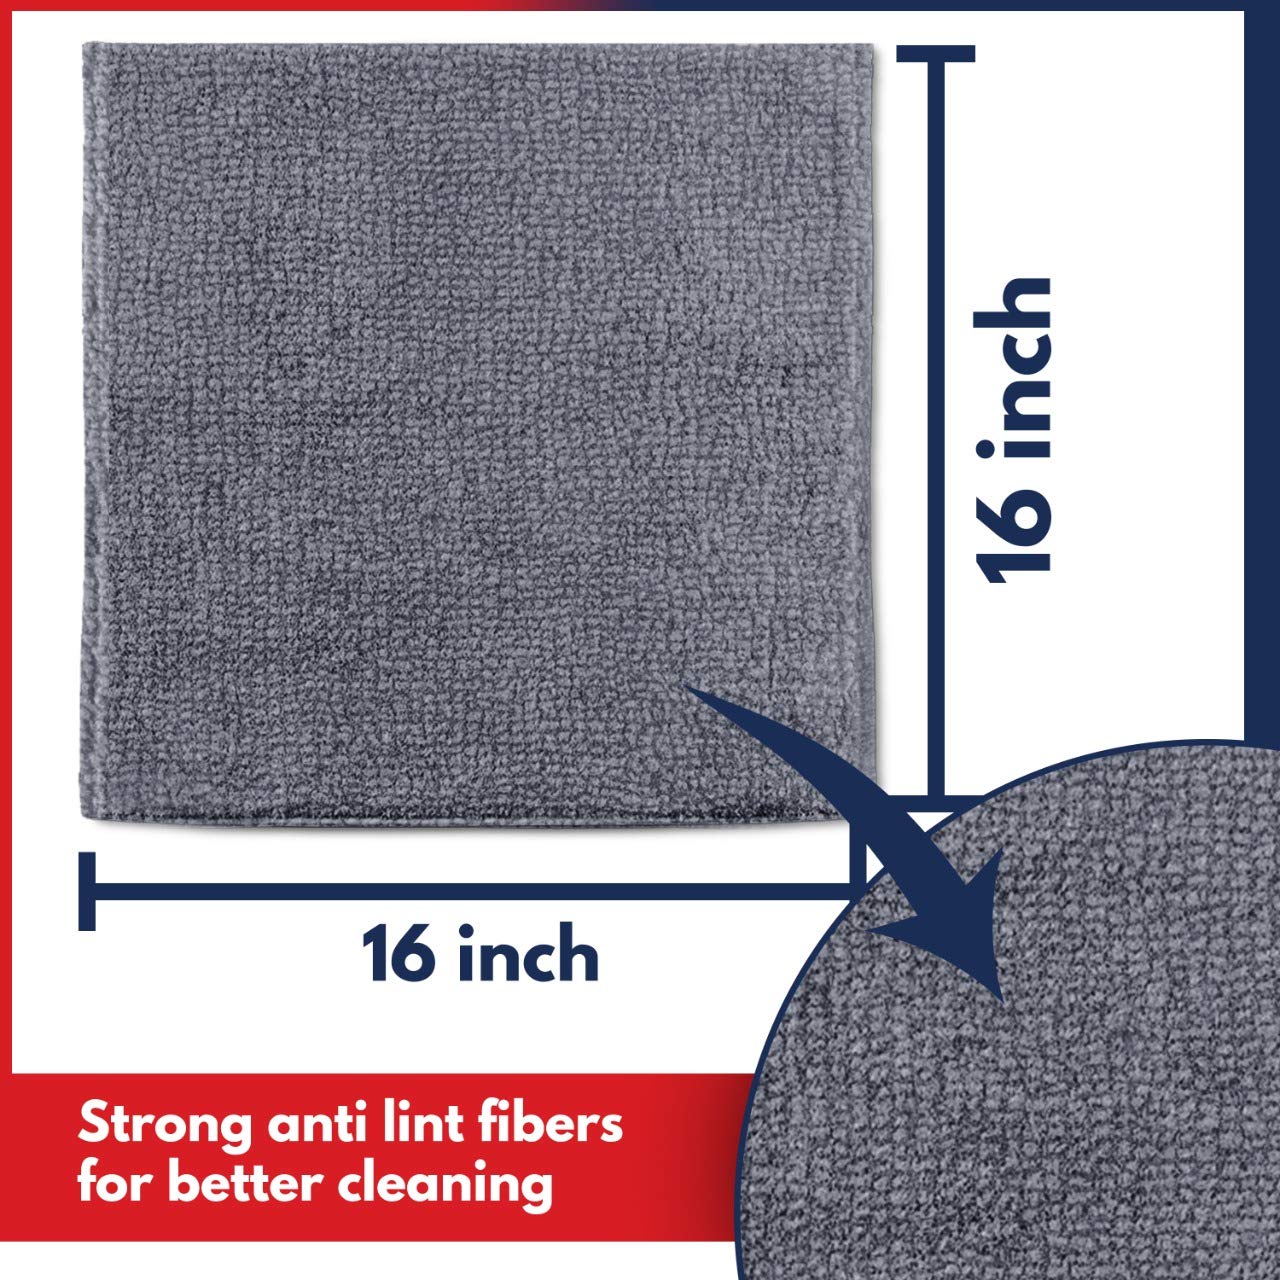 USANOOKS Microfiber Cleaning Cloth Grey - 12 packs 16"x16" - High Performance - 1200 Washes, Ultra Absorbent Towels Weave Grime & Liquid for Streak-Free Mirror Shine - Car Washing cloth and Applicator